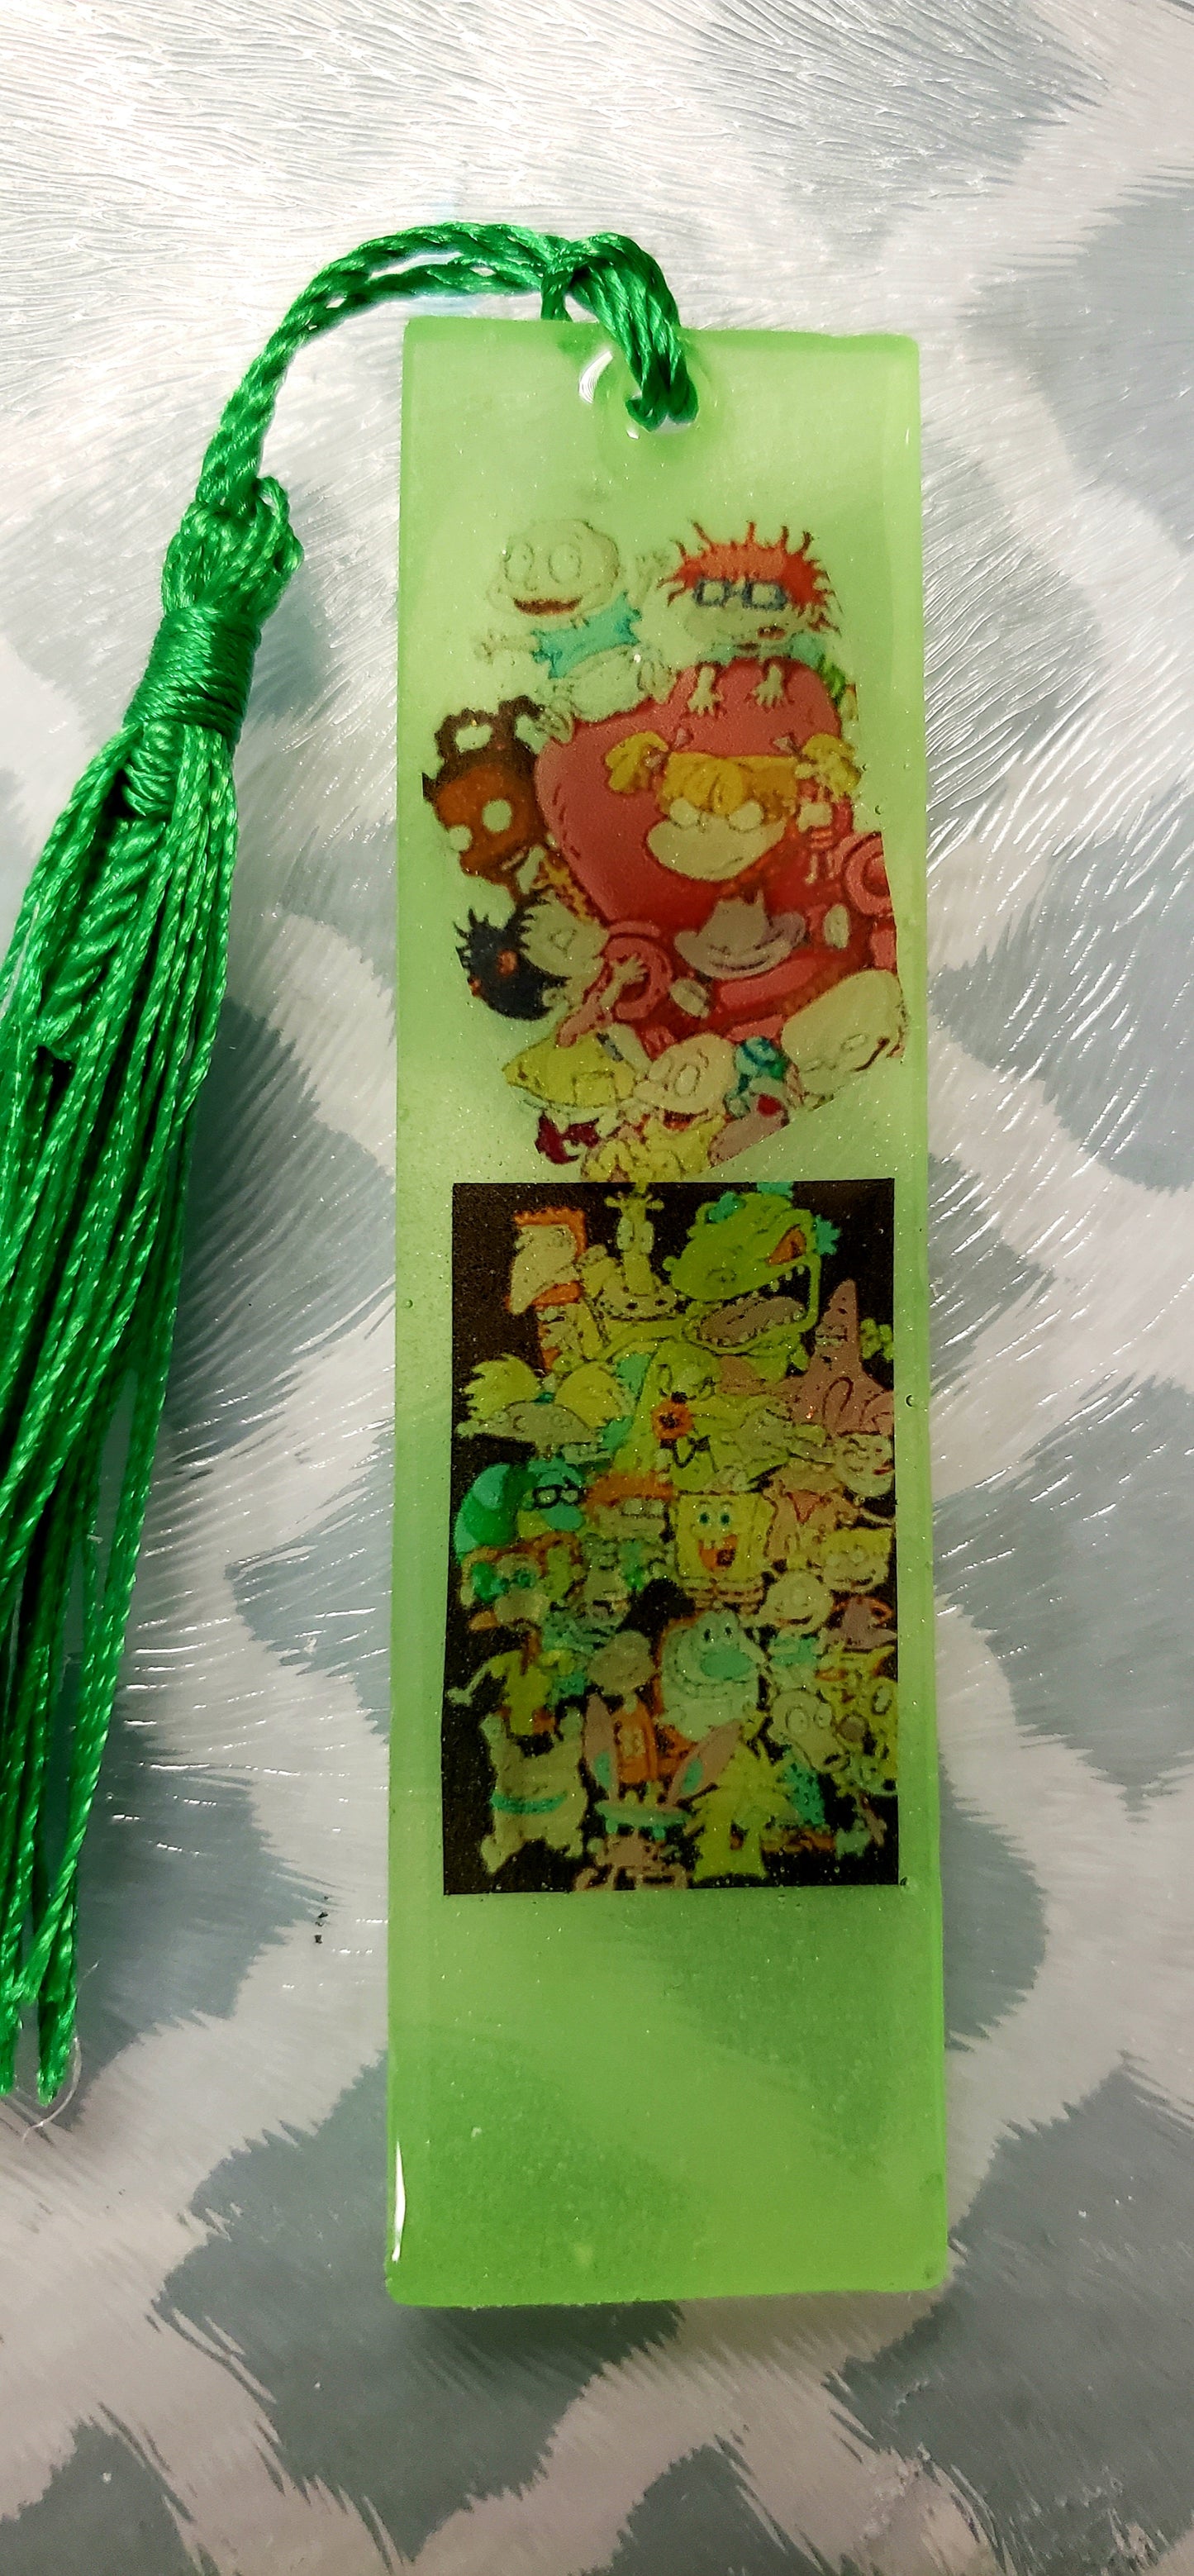 Bookmark Personalized Resin bookmarks/ Kids character bookmarks